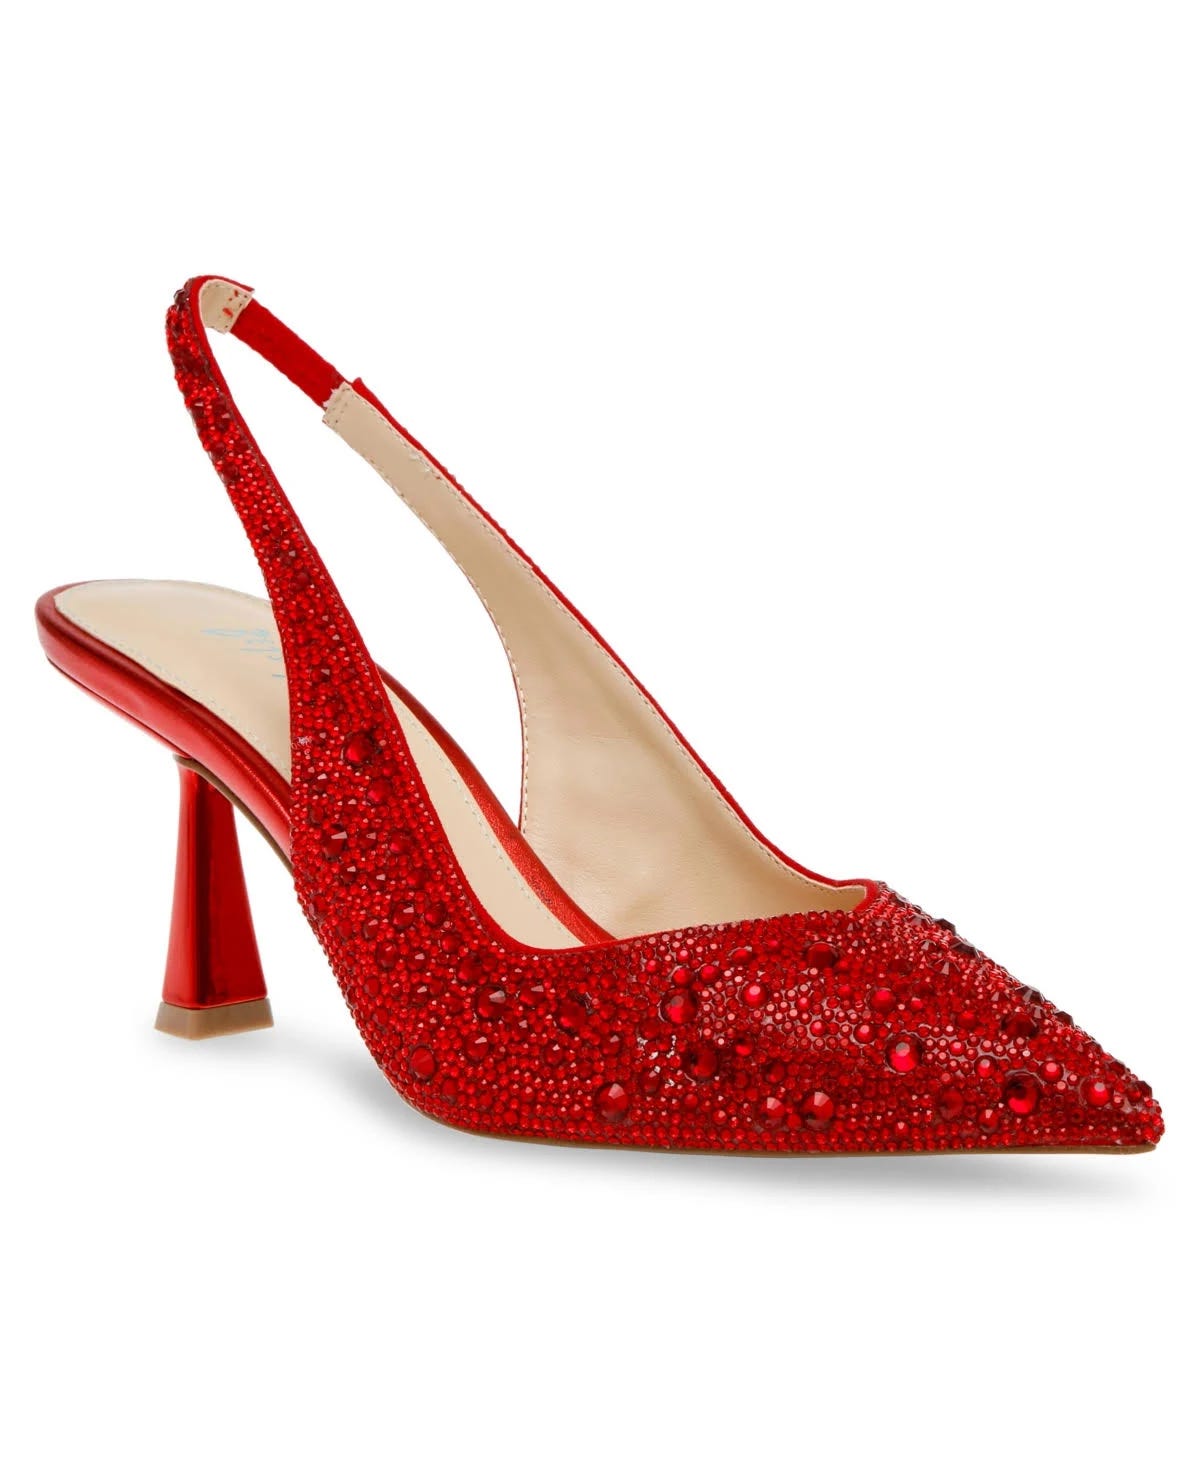 Red Slingback Pump with Pointed Toe - Glamorous Evening Shoe | Image